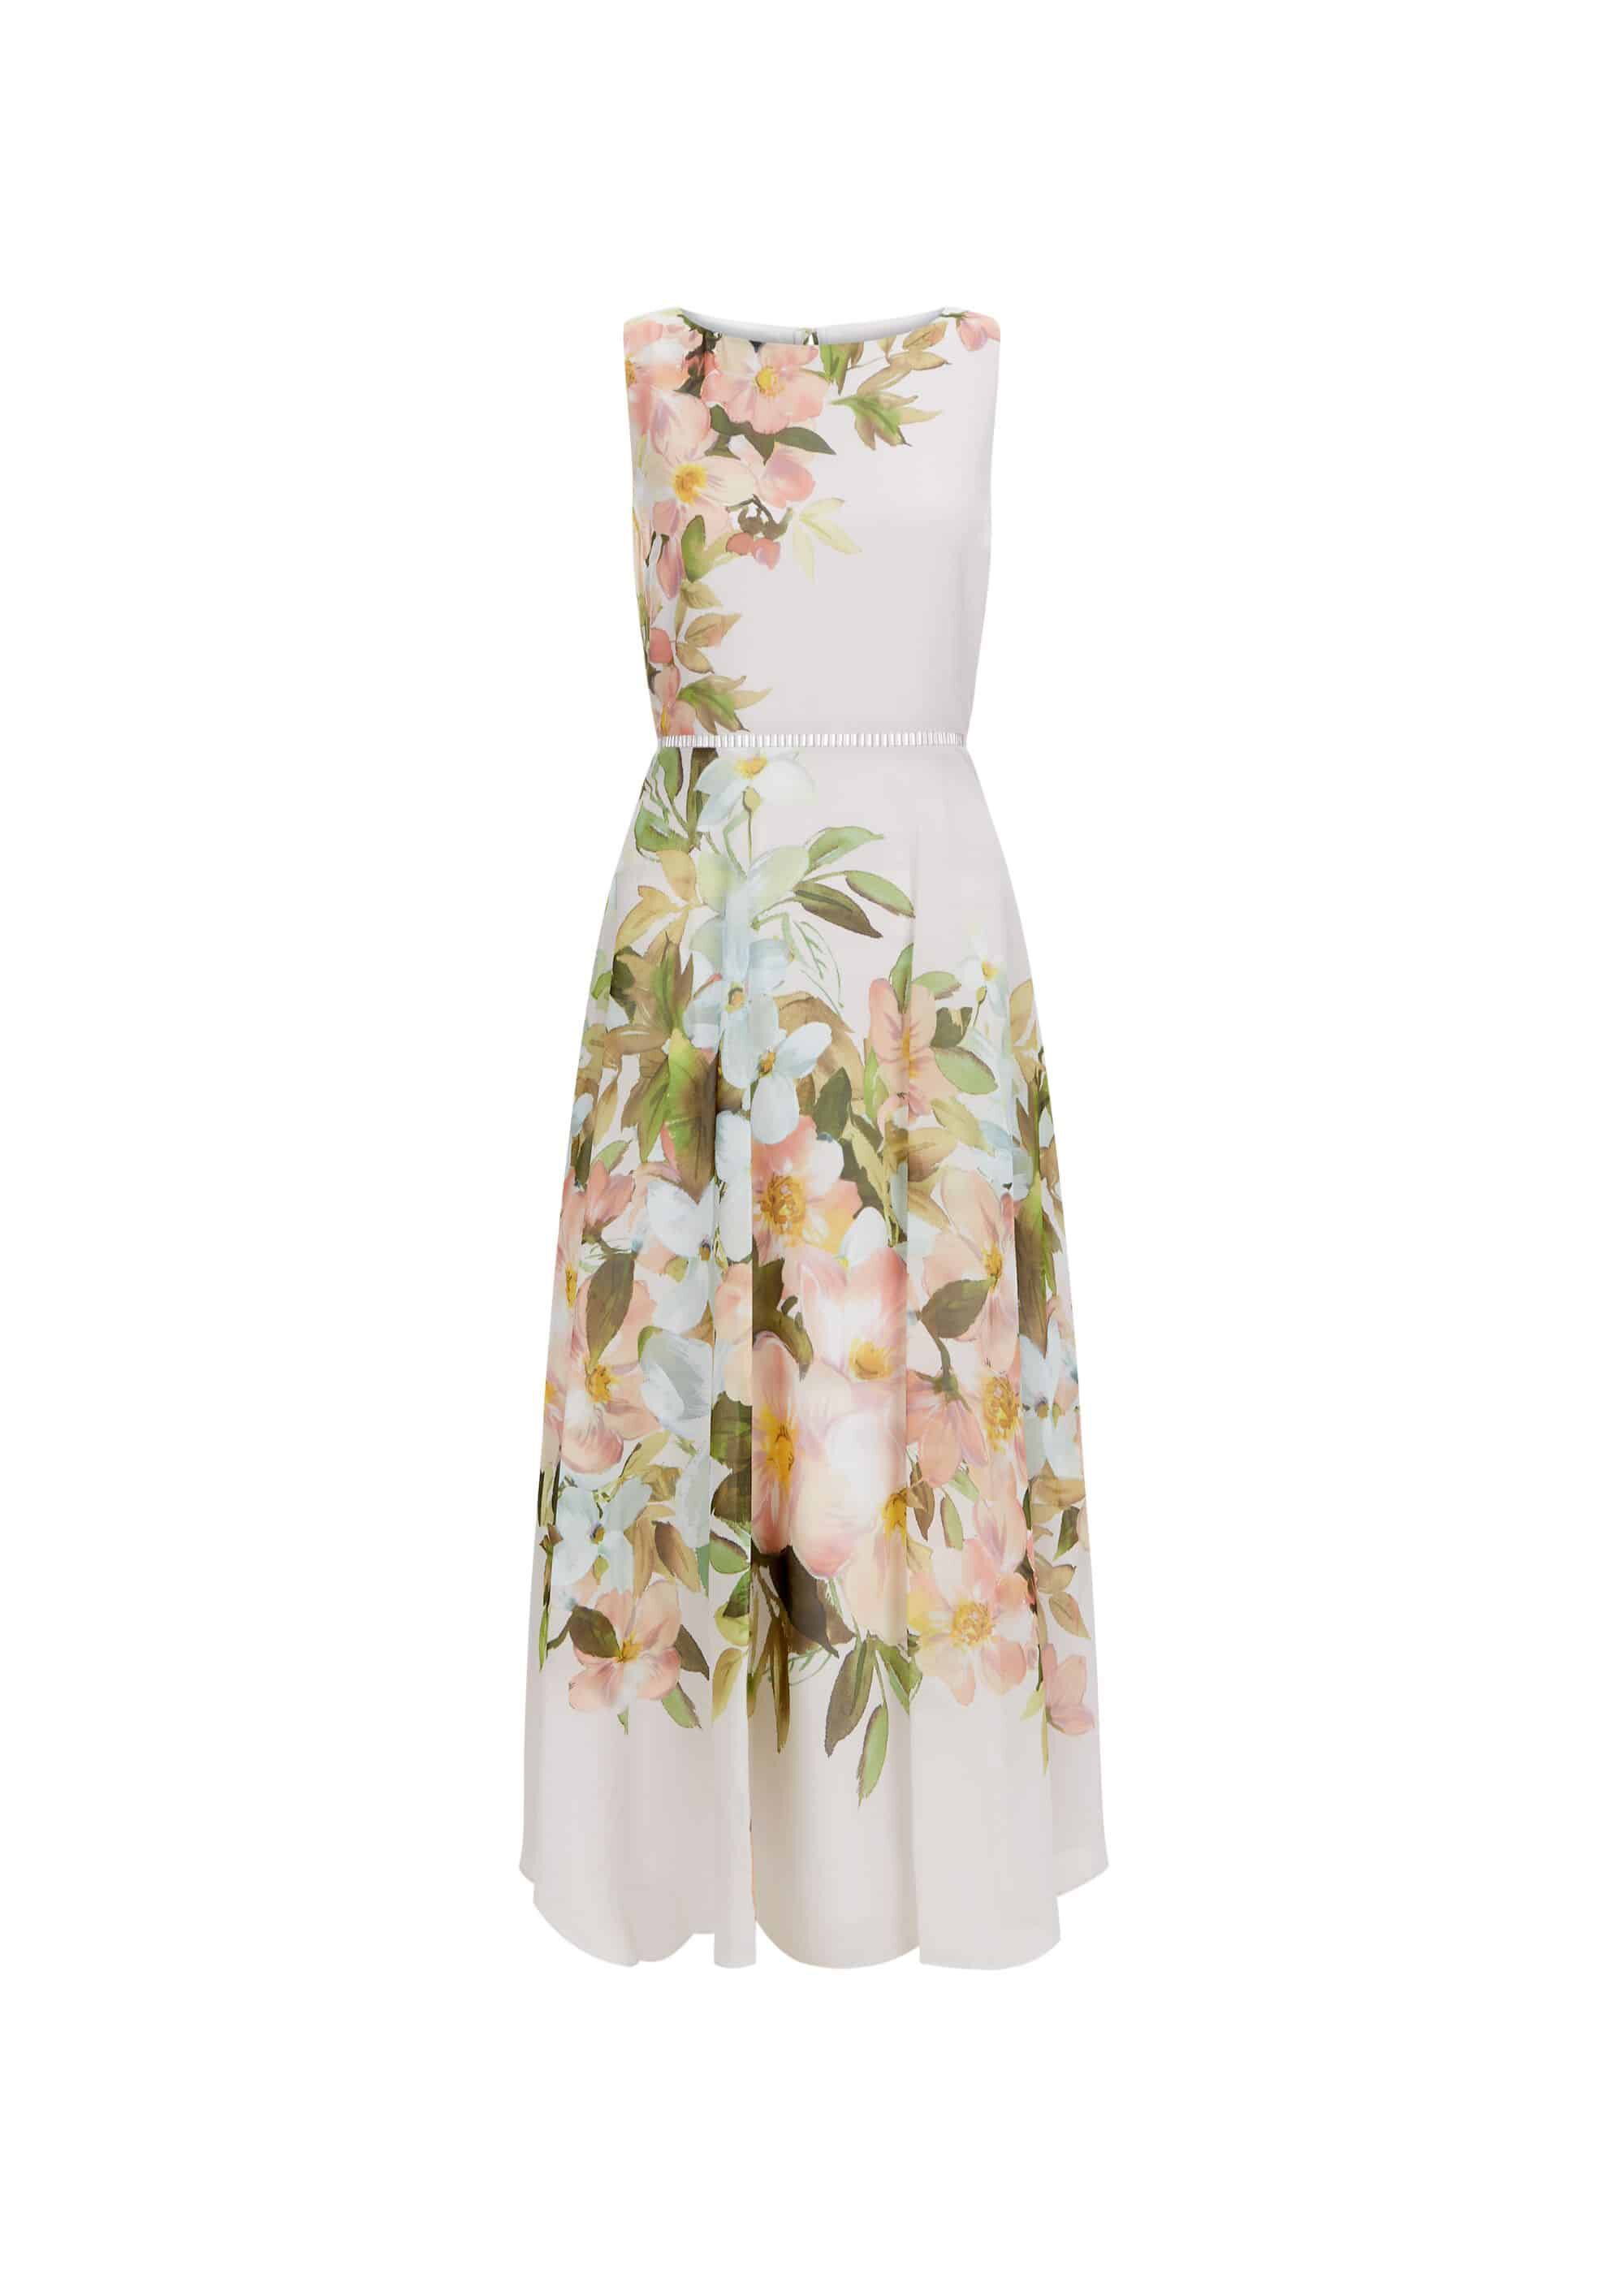 Hobbs Carly Floral Dress Hotsell, 56% OFF | www.hcb.cat